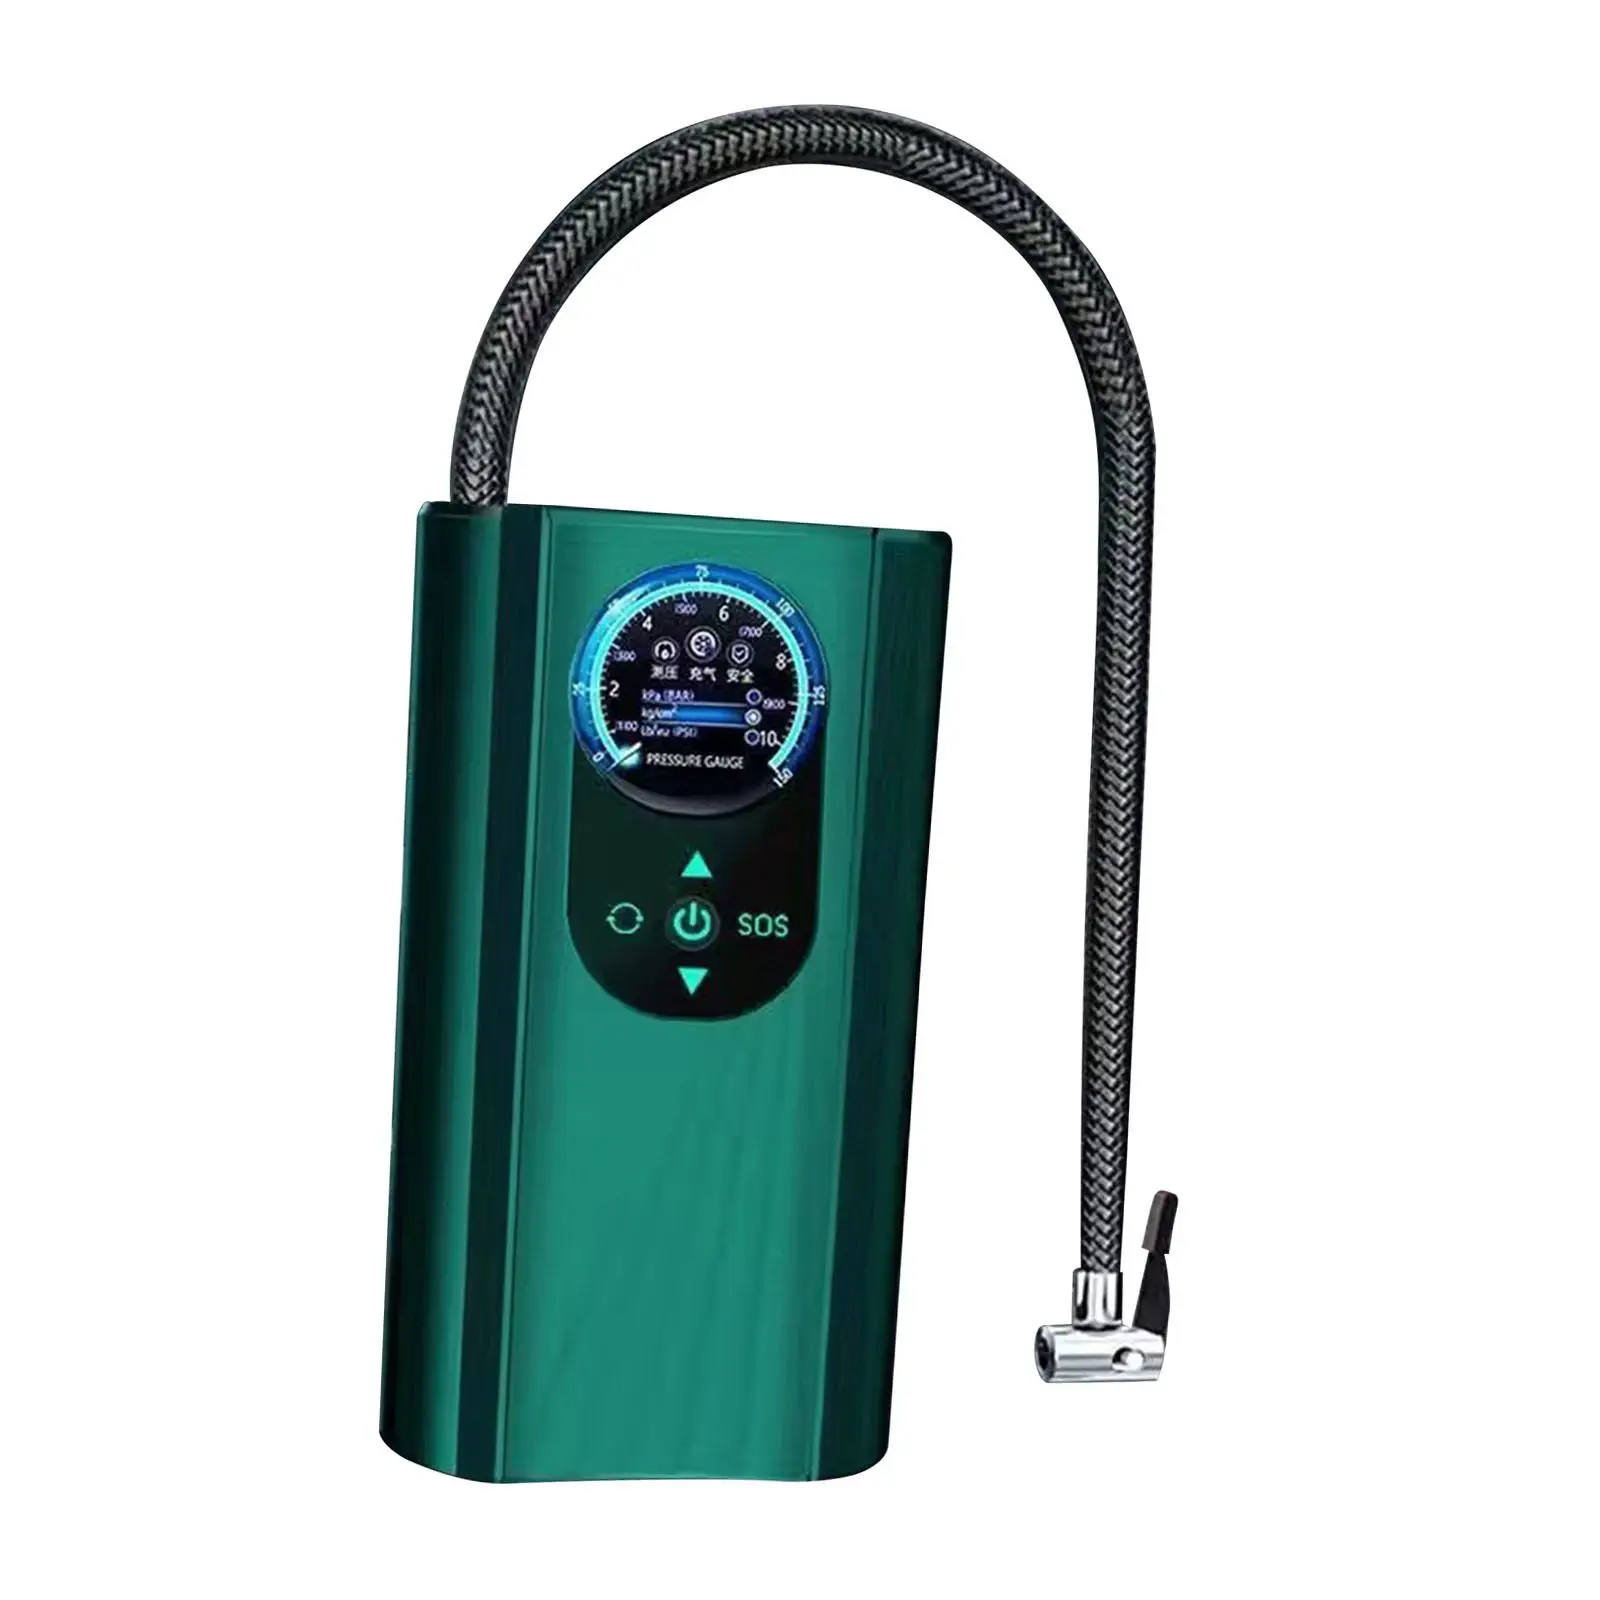 Portable Air Compressor Compact Auto Accessories DC 12V Handheld Tire Inflator Air Pump for Bicycle Car Basketball Ball SUV